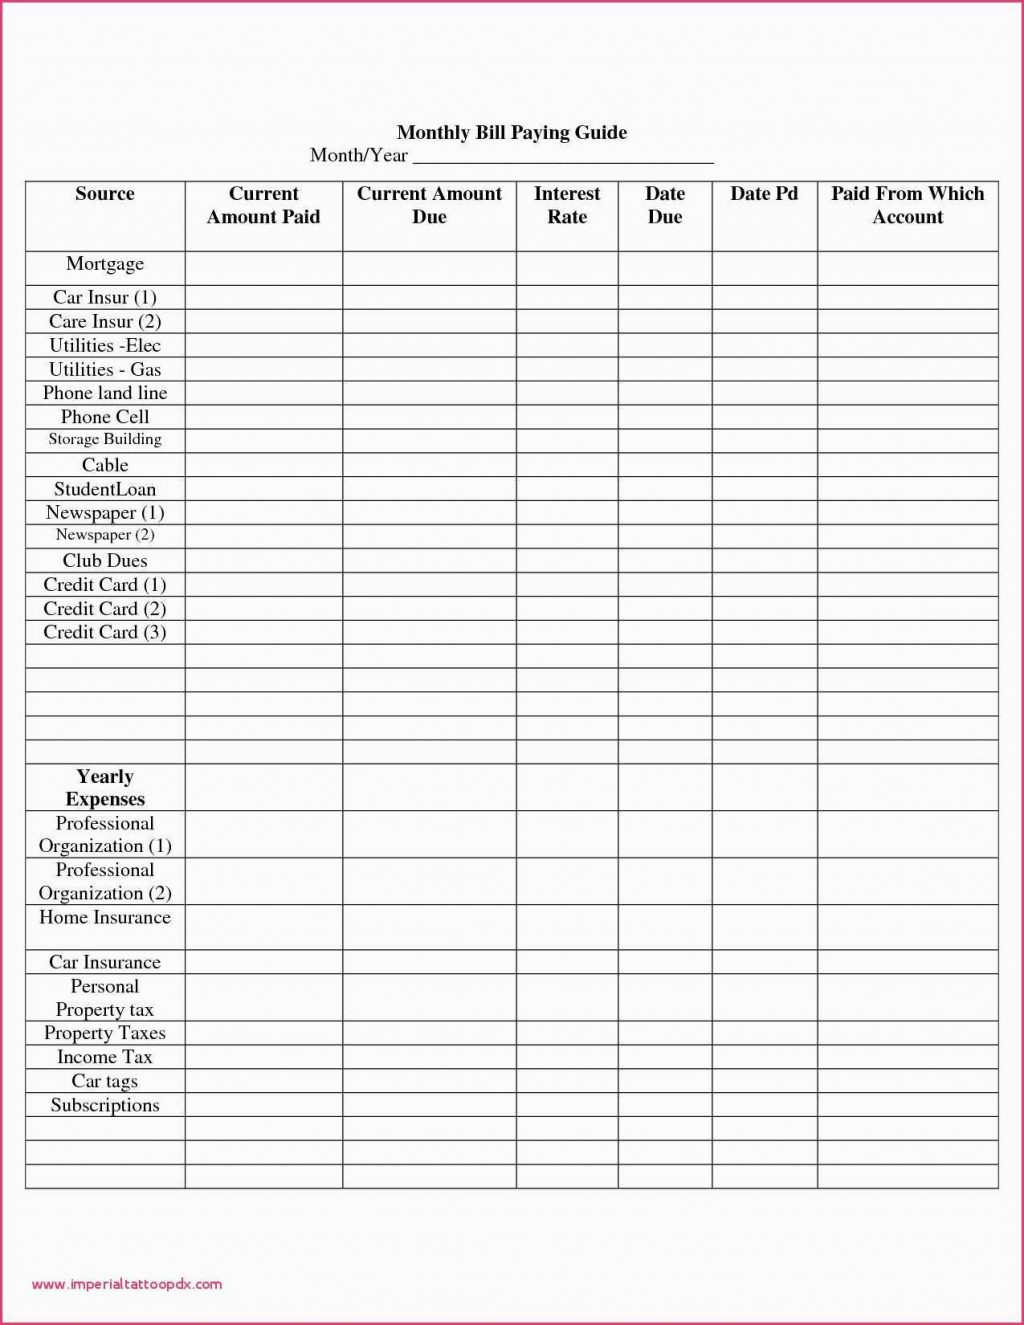 Bill Pay Spreadsheet Of Organizer Chart Excel Monthly Paying for Free Printable Bill Payment Schedule